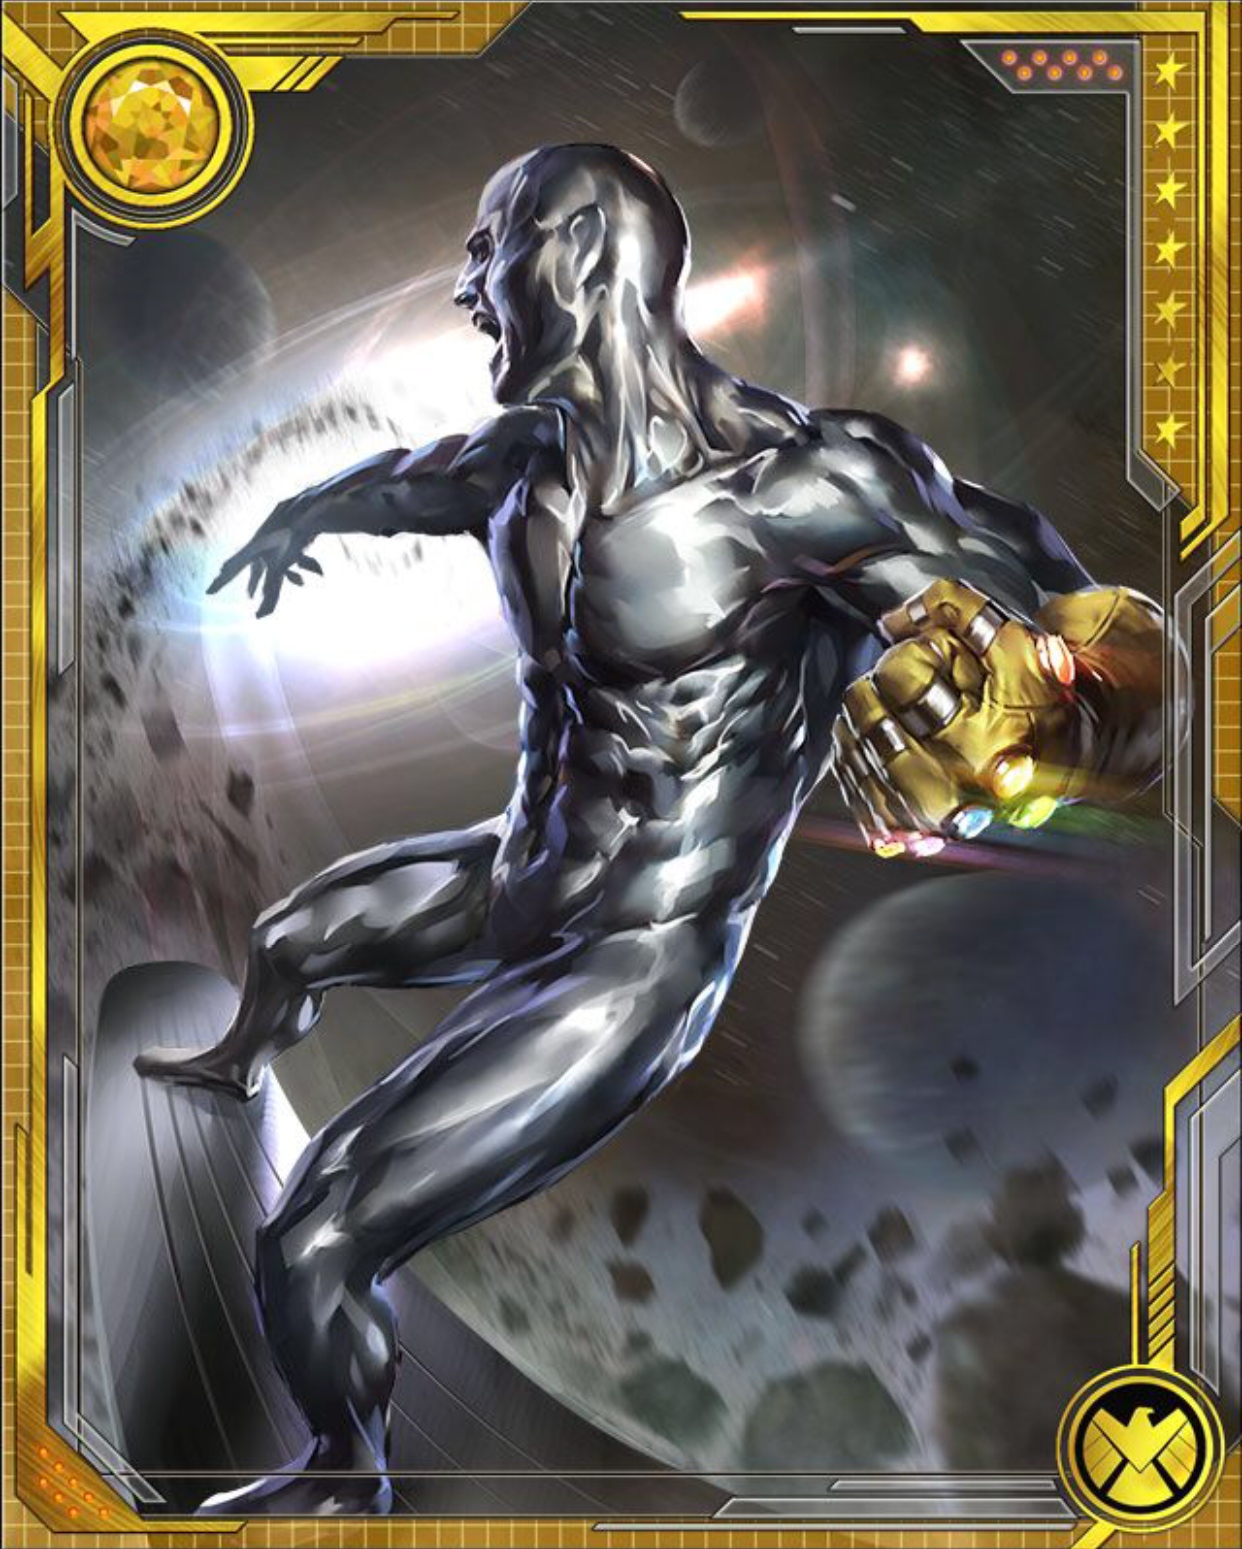 What If? Silver Surfer | Marvel: War of Heroes Wiki | FANDOM powered by Wikia